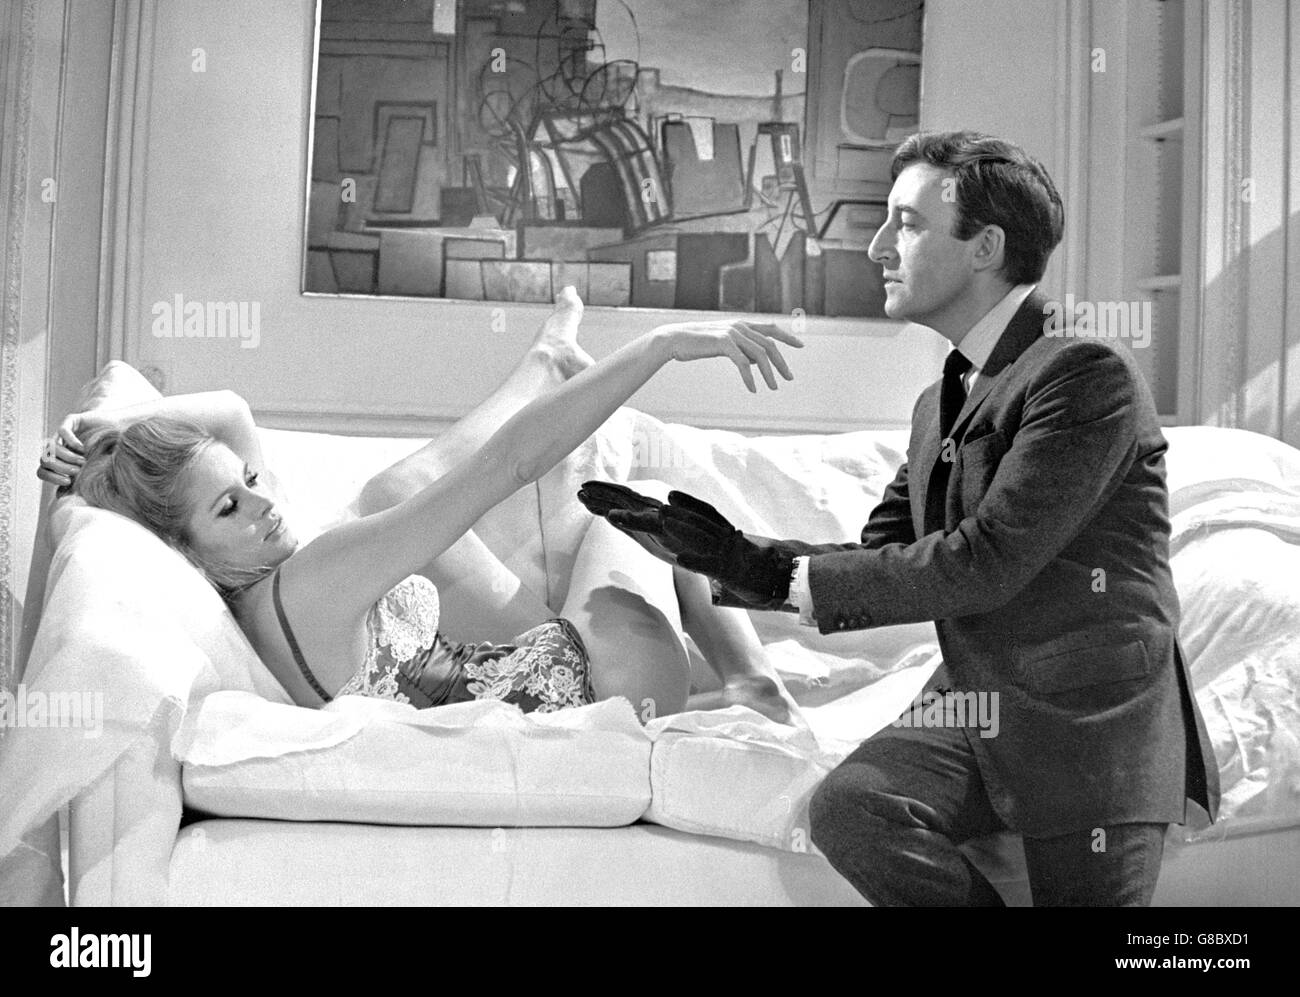 Ursula Andress and Peter Sellers in a scene from Charles K Feldman's new Ian Fleming-inspired film Casino Royale. In the film, Sellers plays the part of Evelyn Tremble, a man who has perfected an infallible baccarat system. Stock Photo